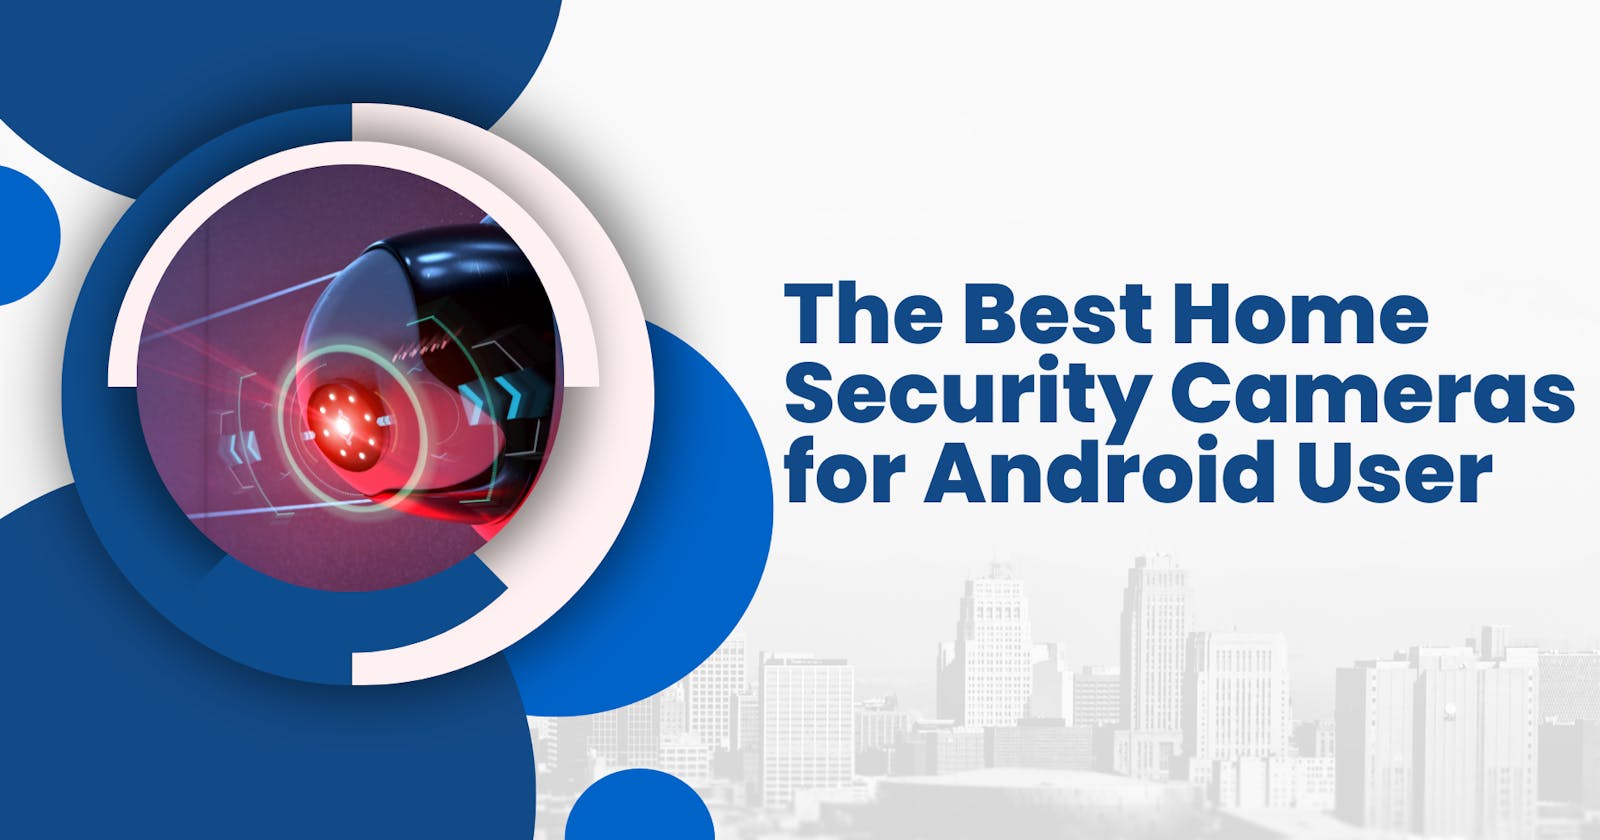 The Best Home Security Cameras for Android Users